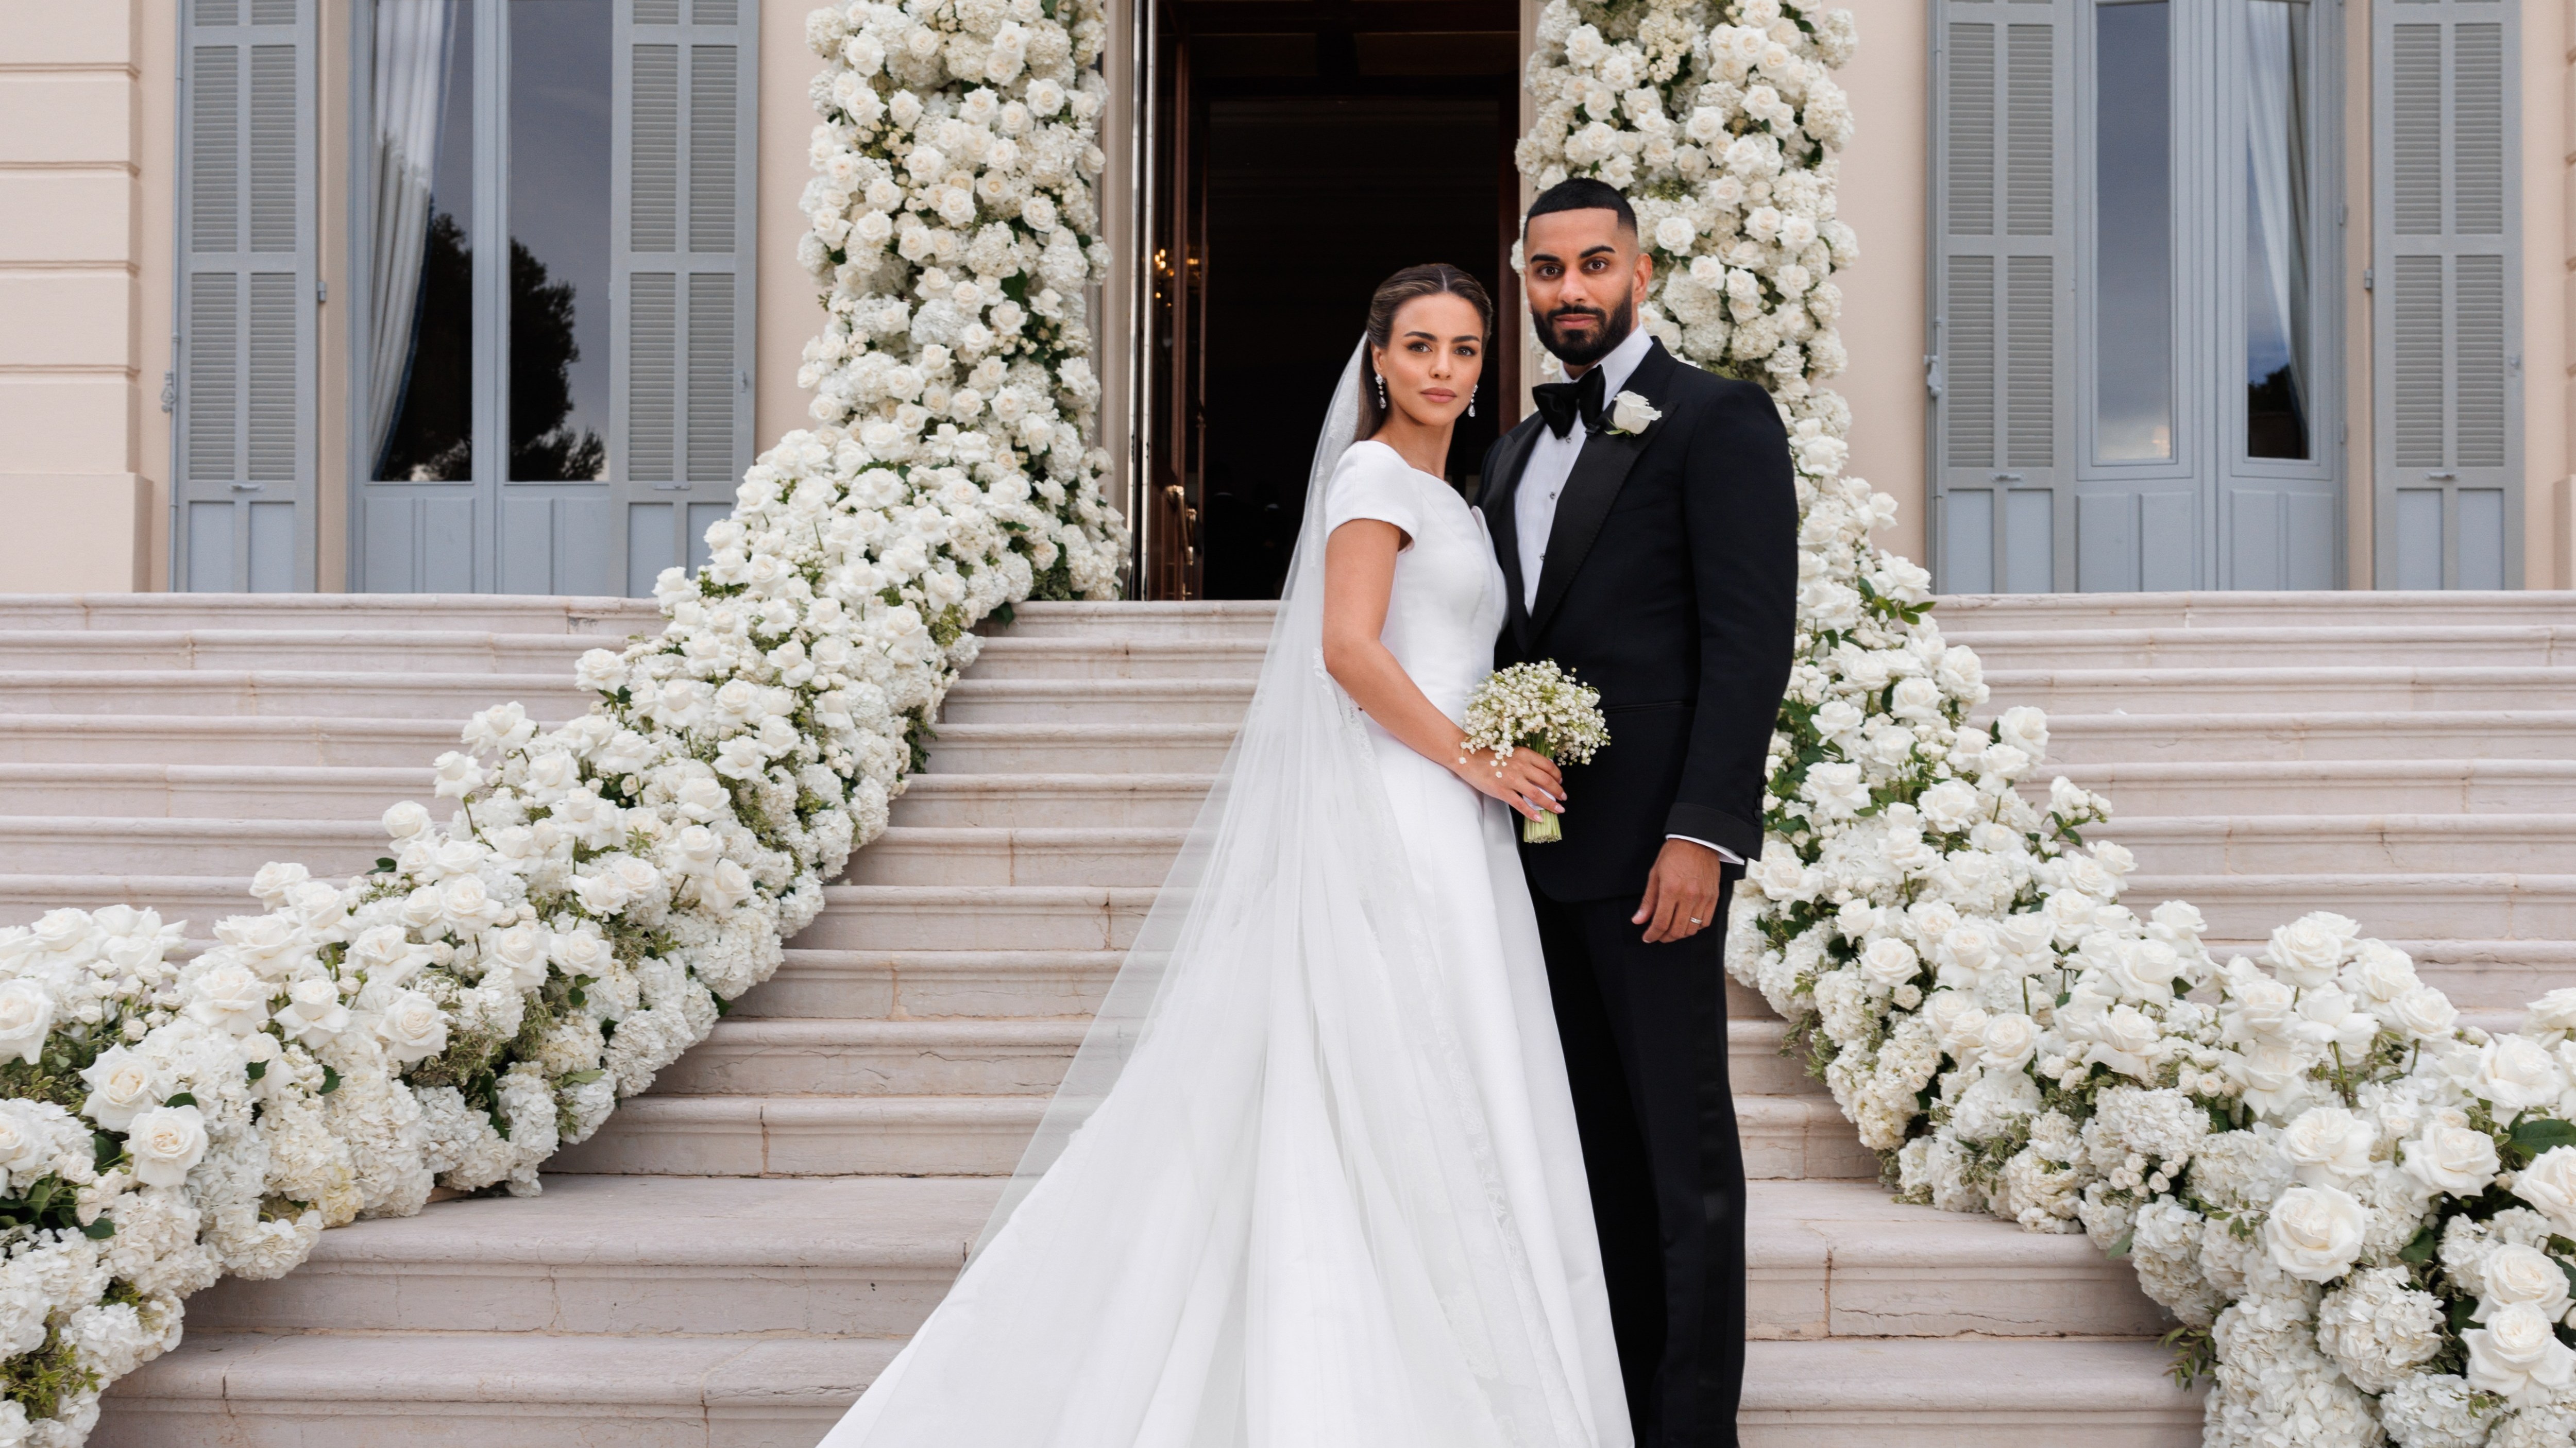 Nada Adelle and Umar Kamani married at the Hotel du Cap-Eden-Roc in Cap D’Antibes